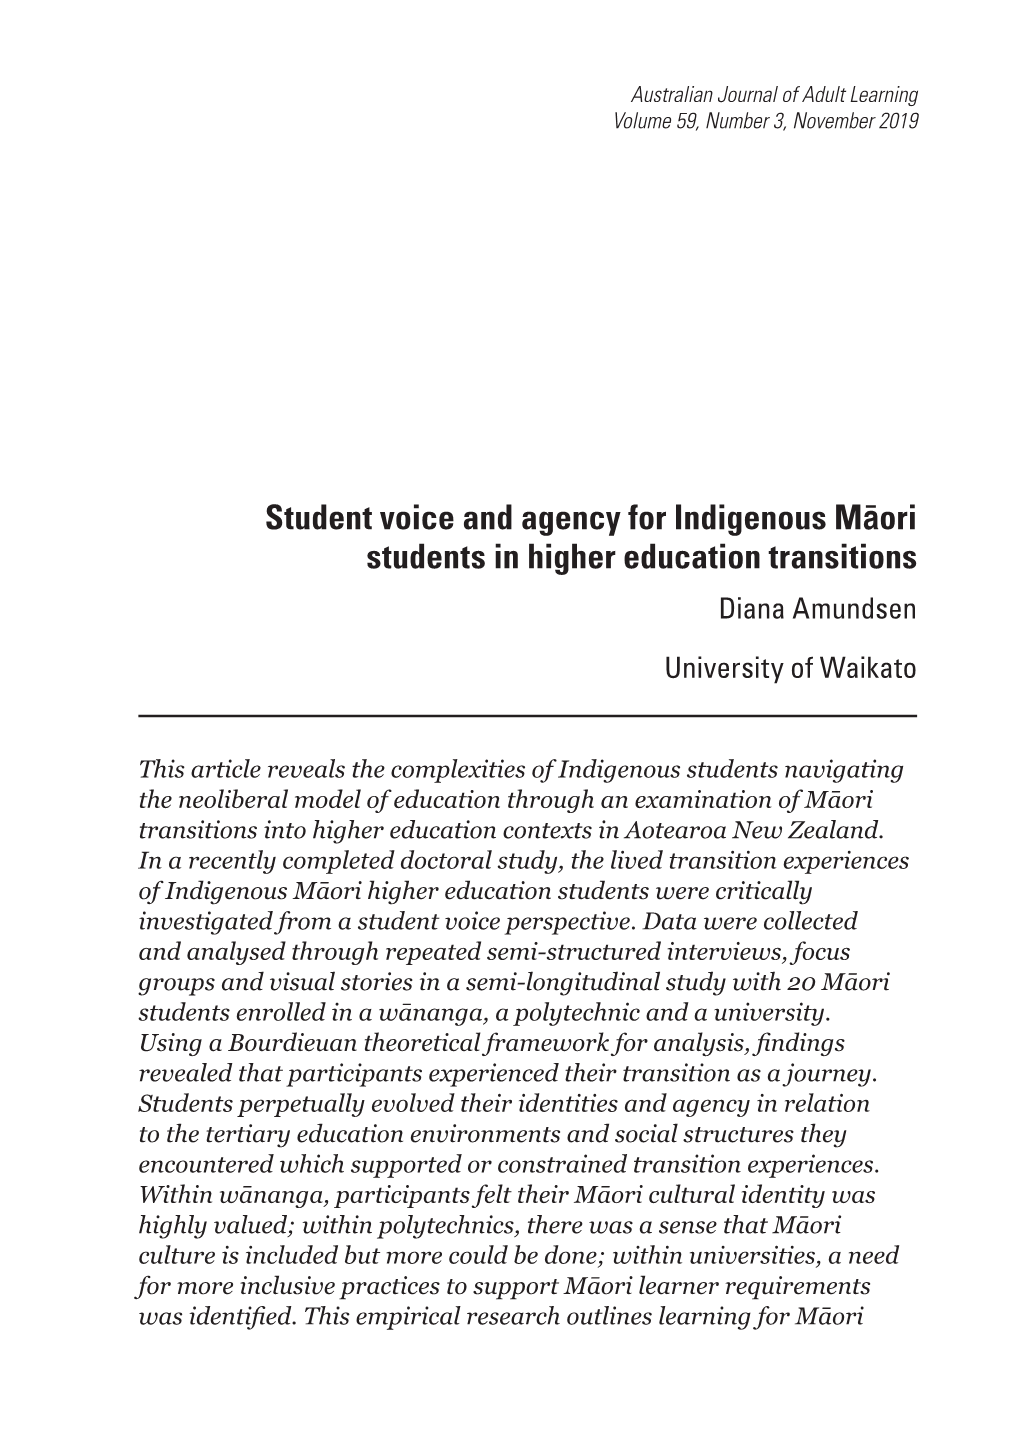 Student Voice and Agency for Indigenous Māori Students in Higher Education Transitions Diana Amundsen